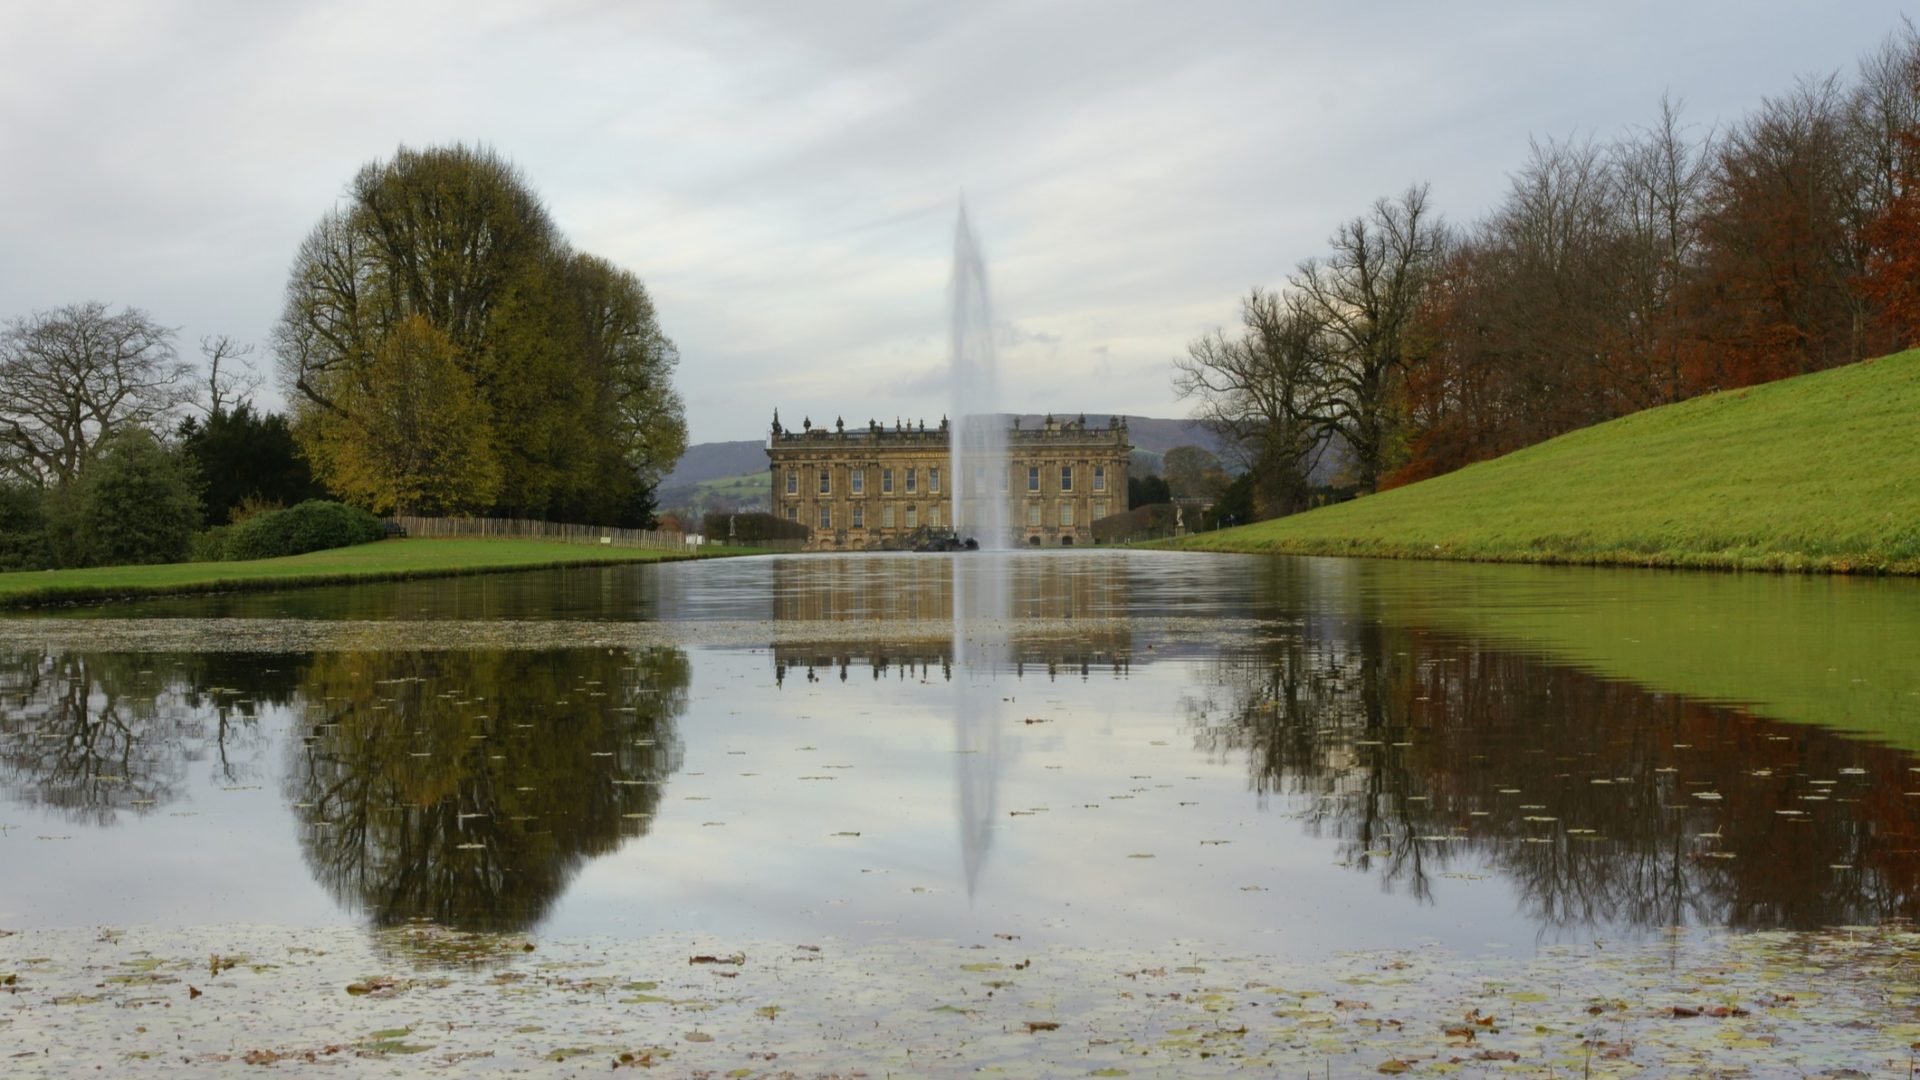 Chatsworth House from the Canal Lake (image: Dreamstime)